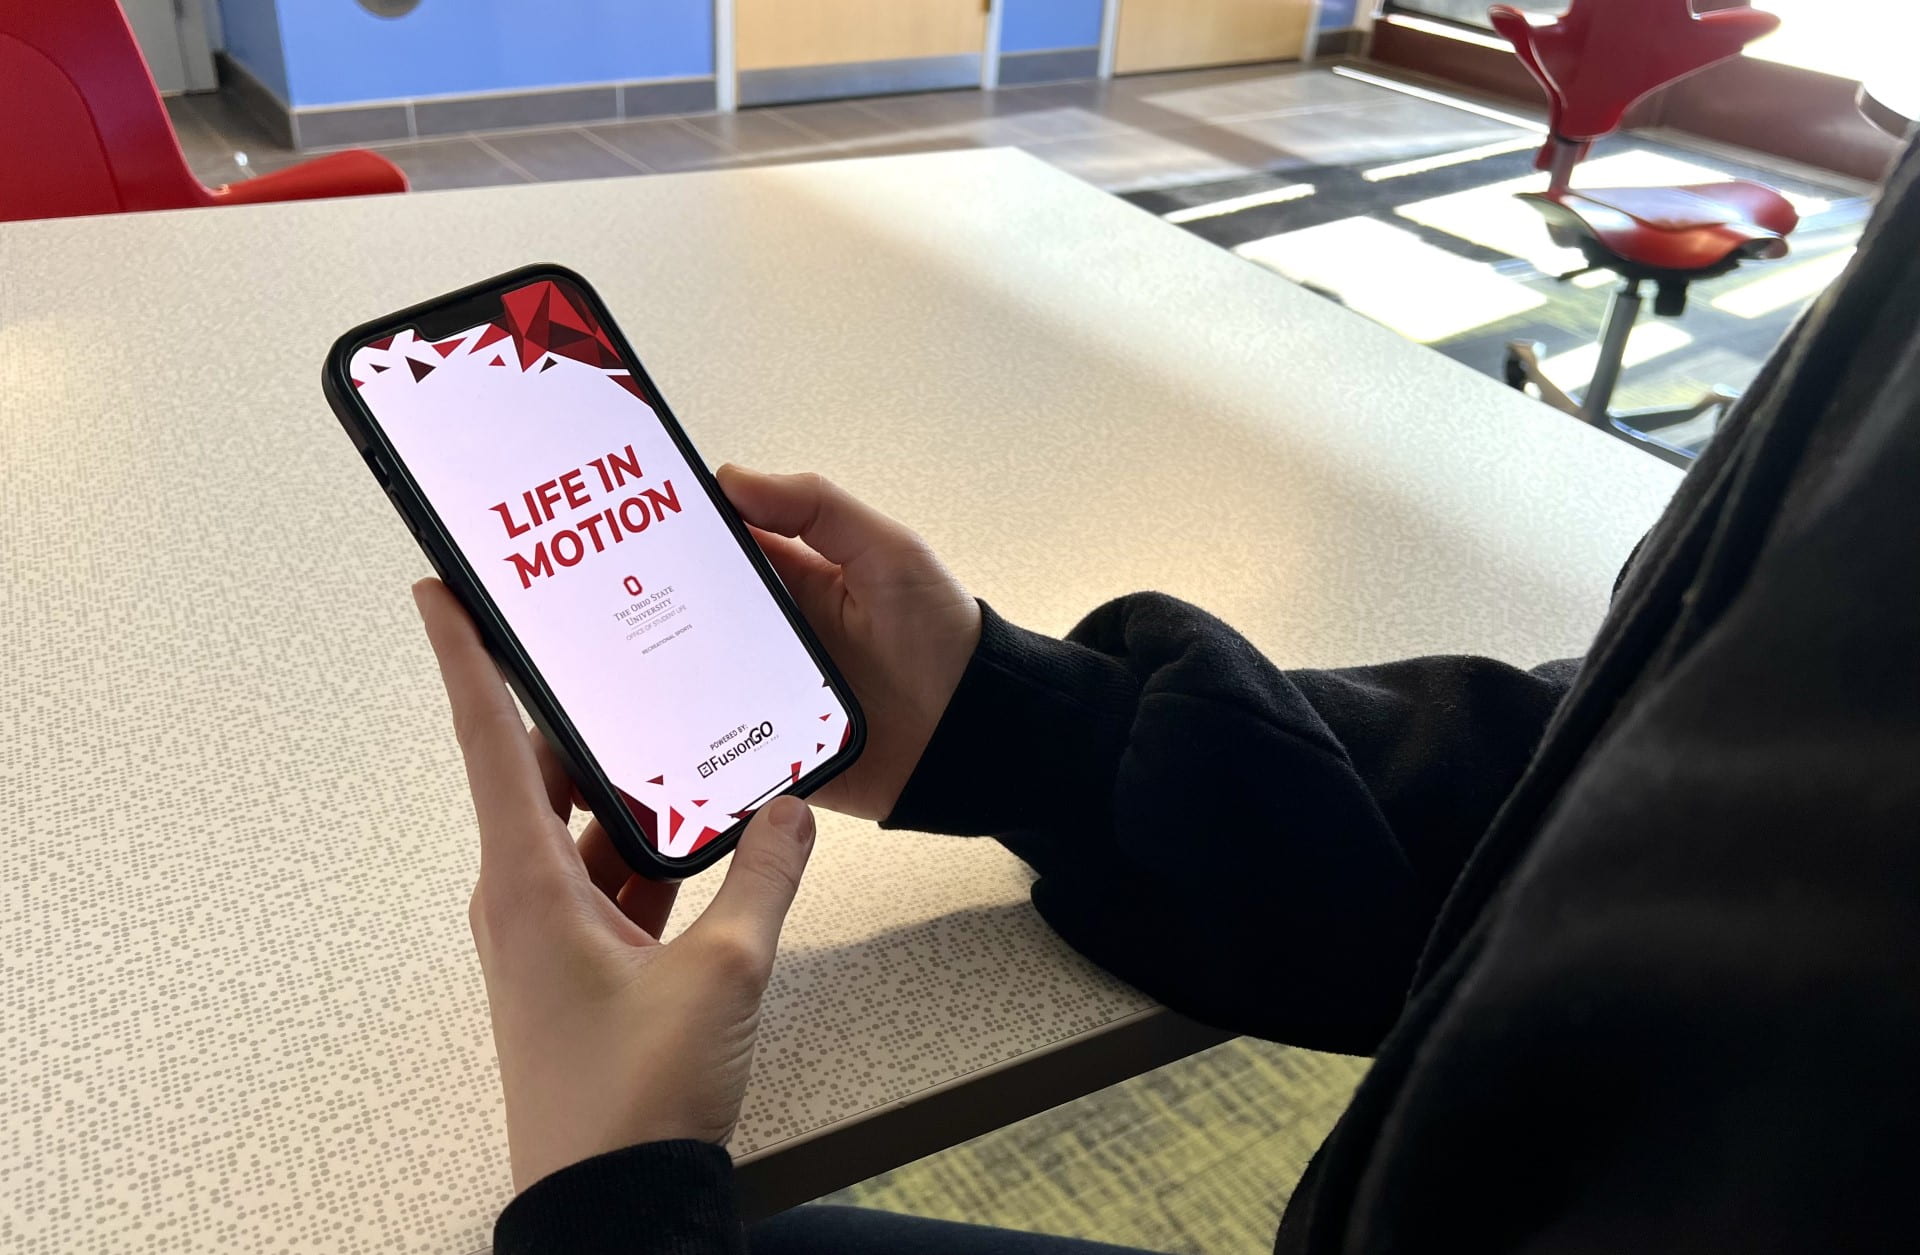 The new Ohio State Recreational Sports mobile app is aiming to make exercise more accessible for students. Credit: Kamryn Karr | Lantern Reporter